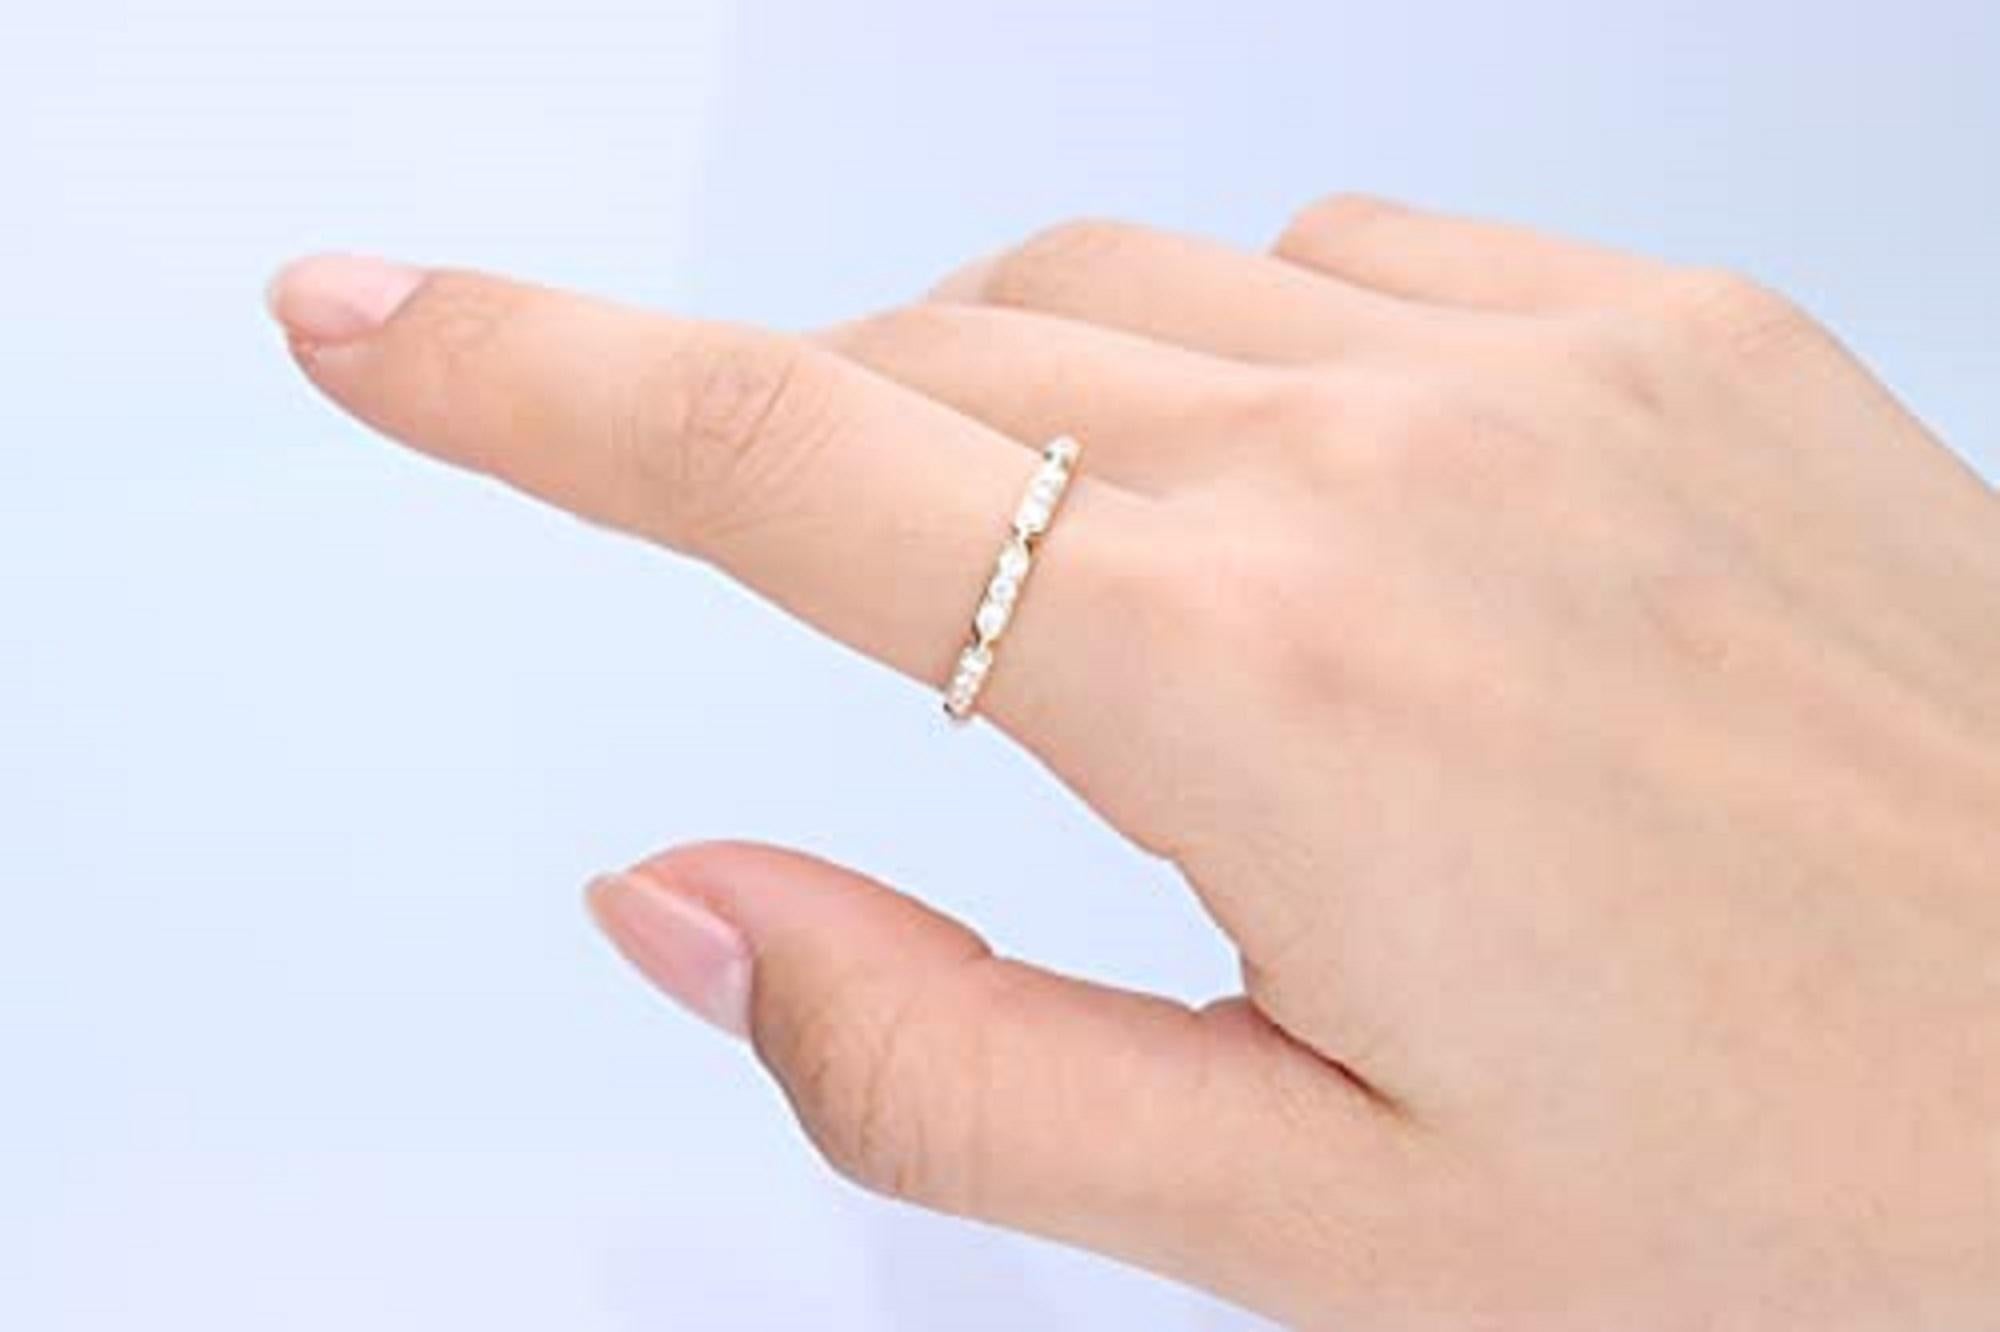 Decorate yourself in elegance with this Ring is crafted from 14-karat Yellow Gold by Gin & Grace. This Ring is made up of Round-cut Prong-Setting White Diamond (15 Pcs) 0.33 Carat . This Ring is weight 1.82 grams. This delicate Ring is polished to a